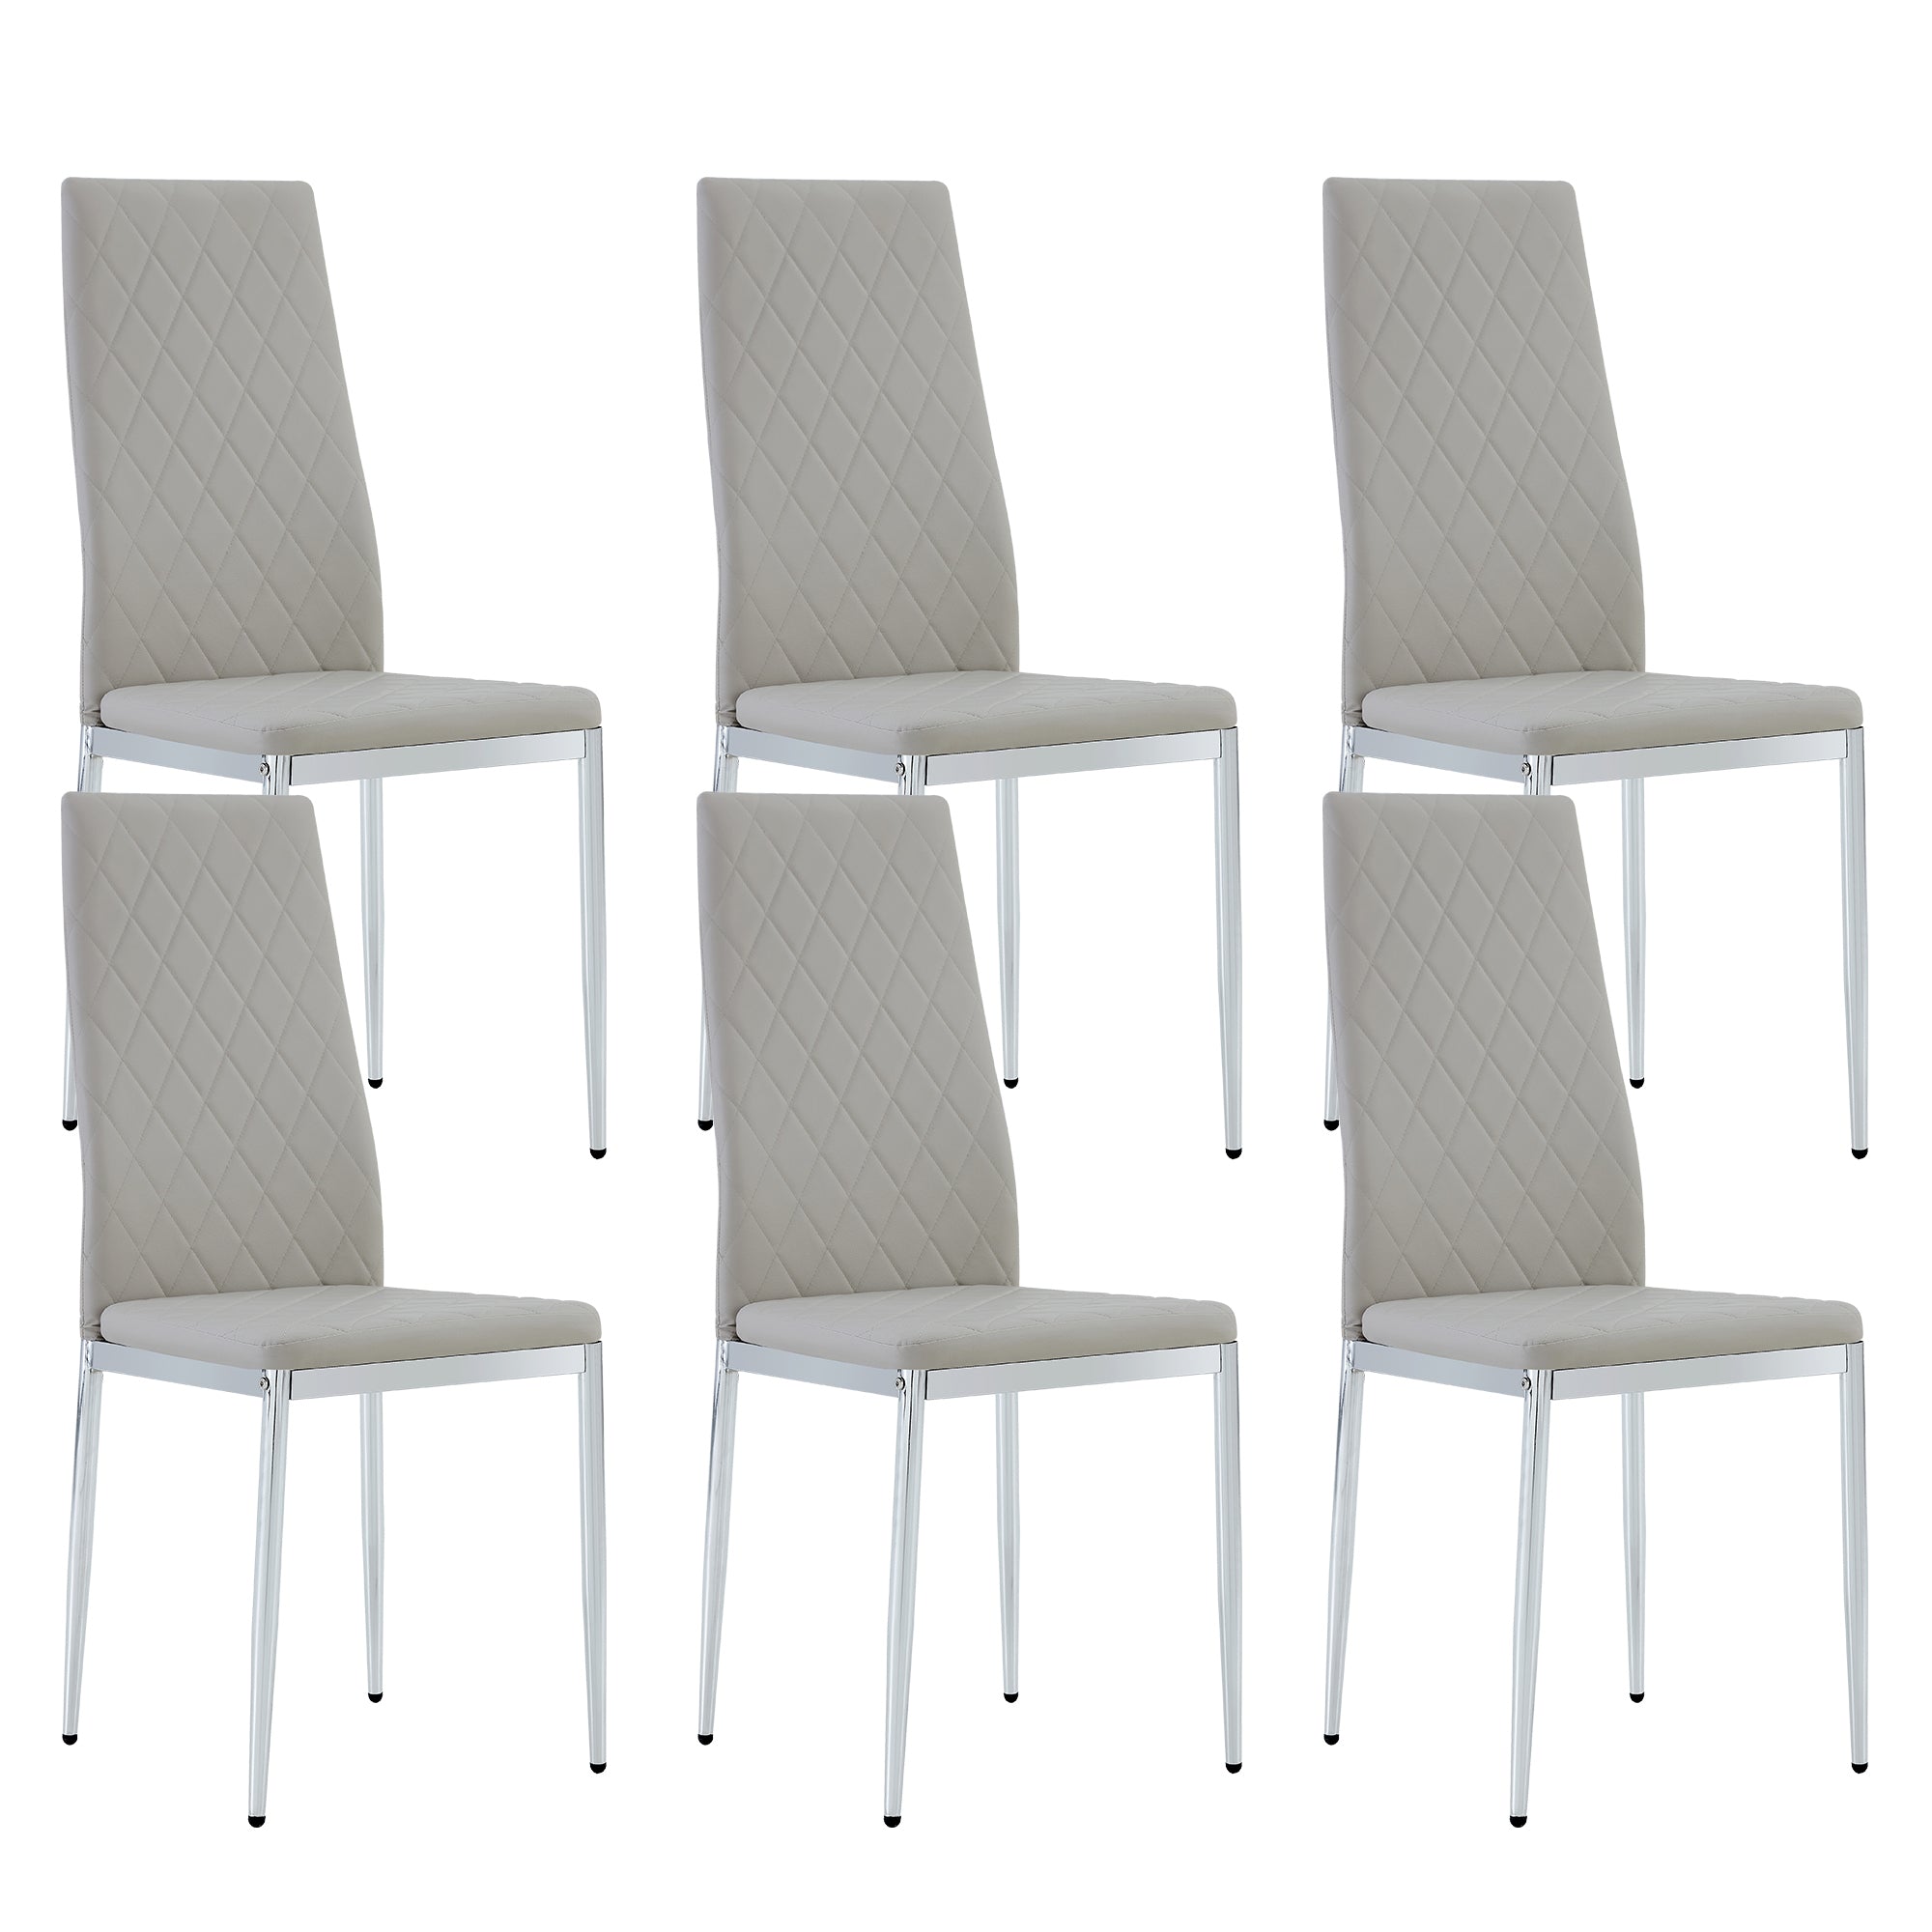 6-piece Set Chairs - Light Grey chairs